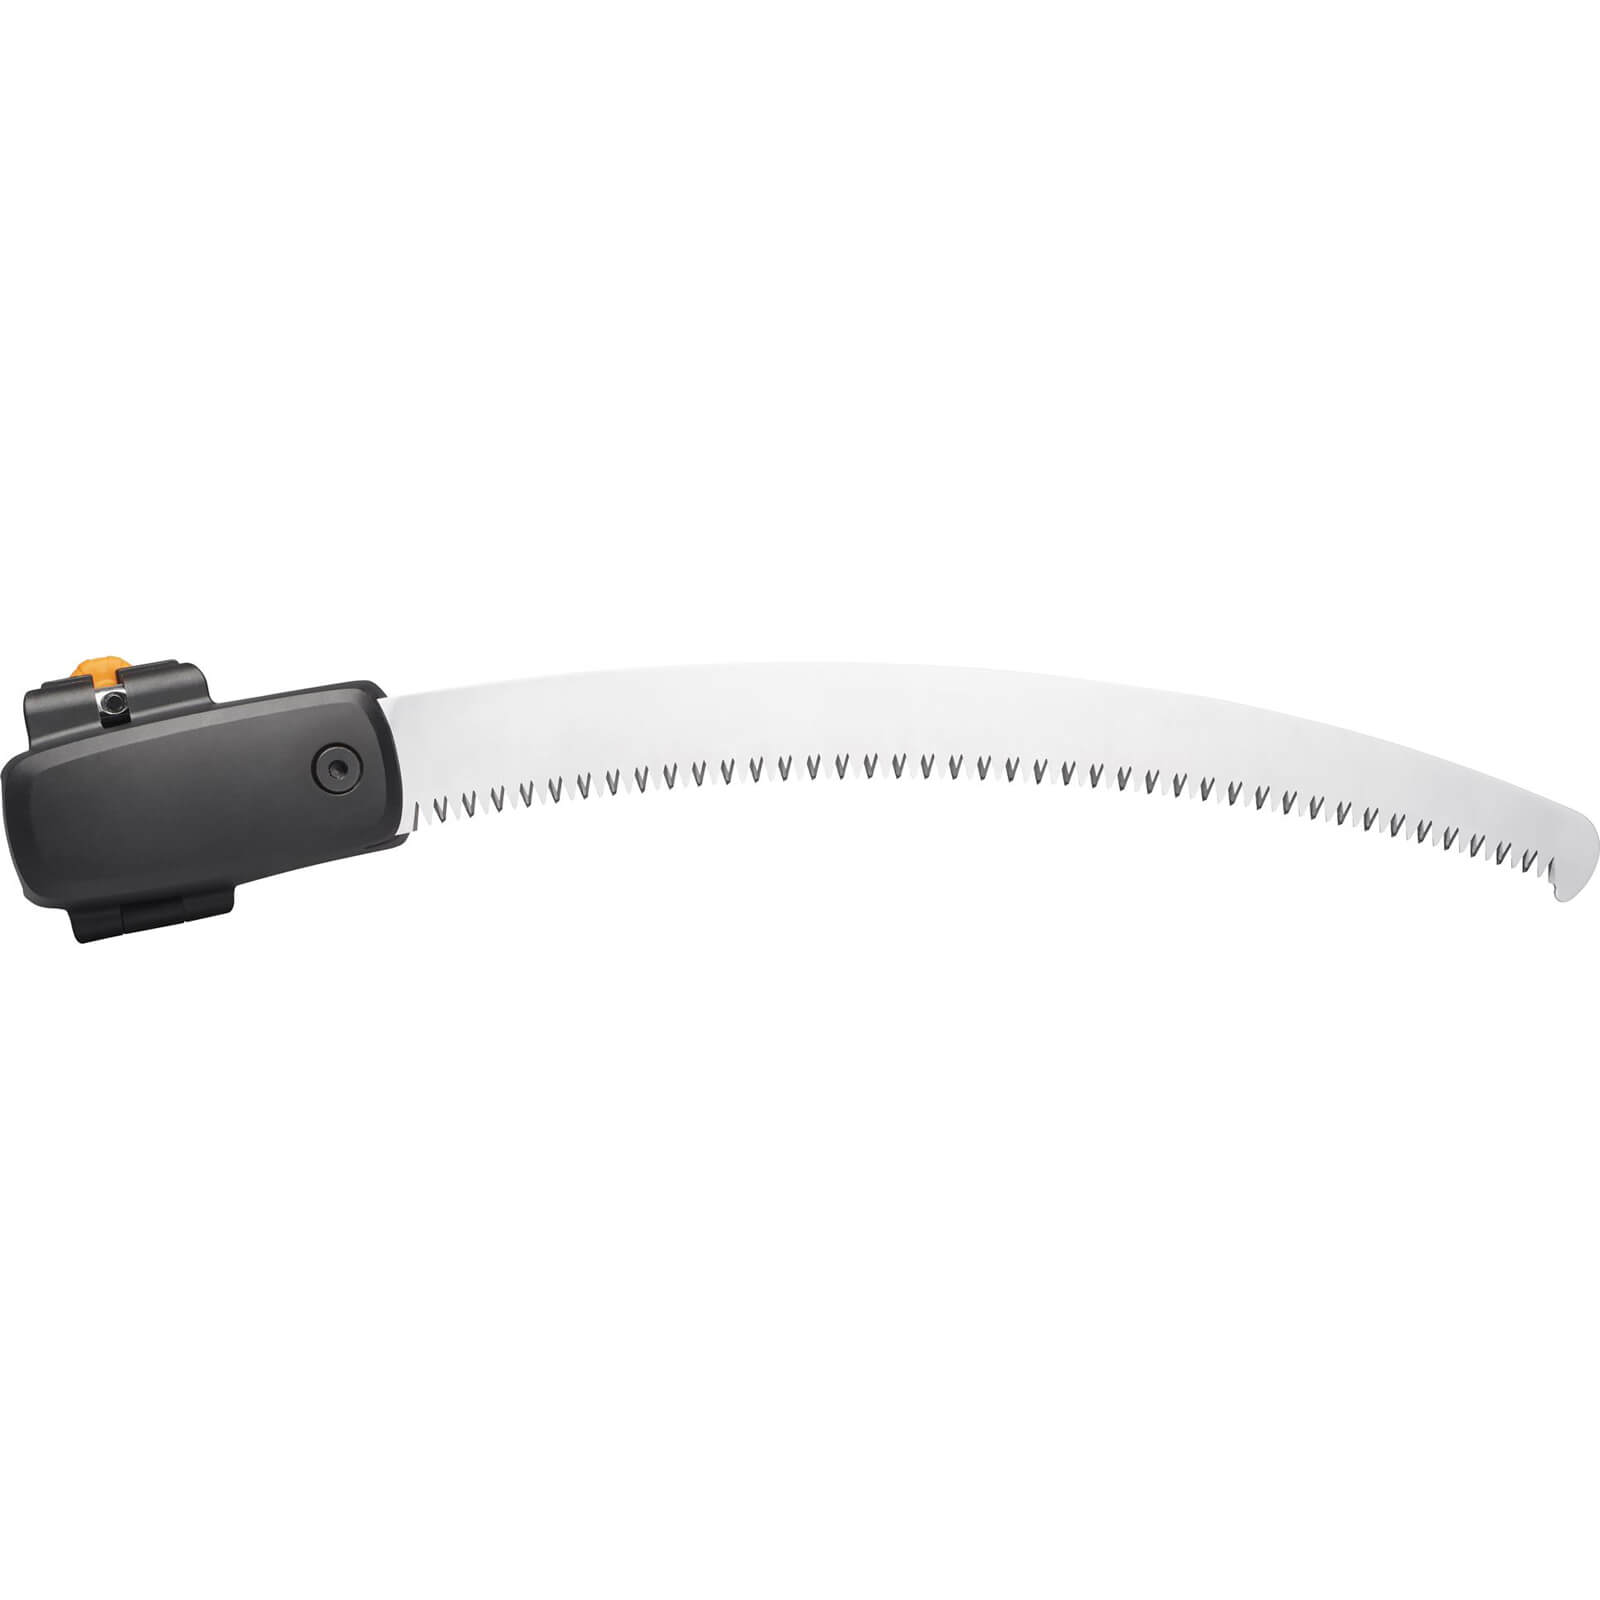 Image of Fiskars Branch Saw for UPX86 and UPX82 Tree Pruners